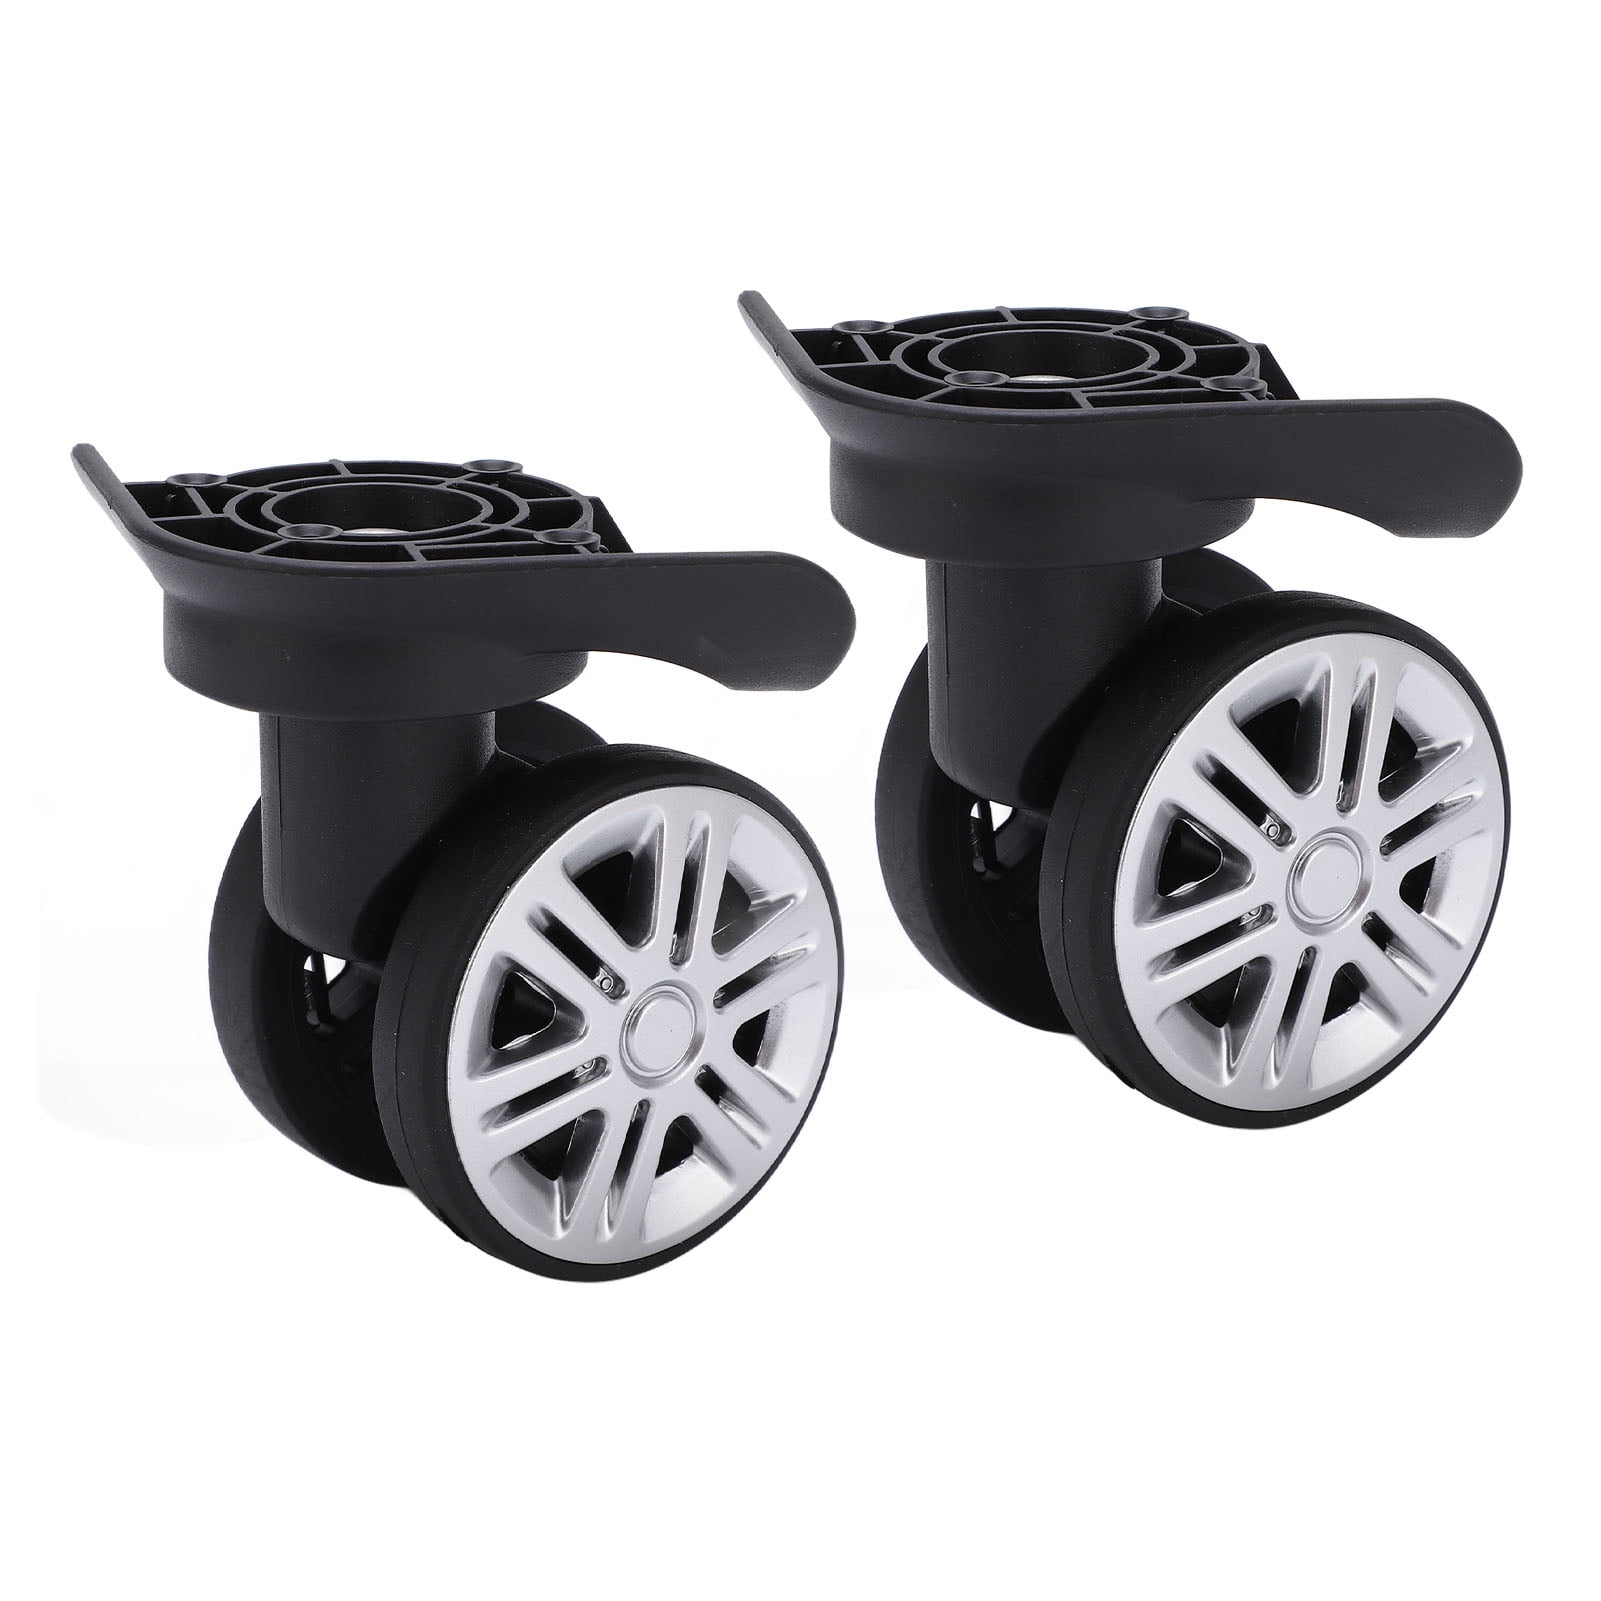 Suitcase Casters, Wear Resistance Quiet Luggage Casters For Luggage For ...